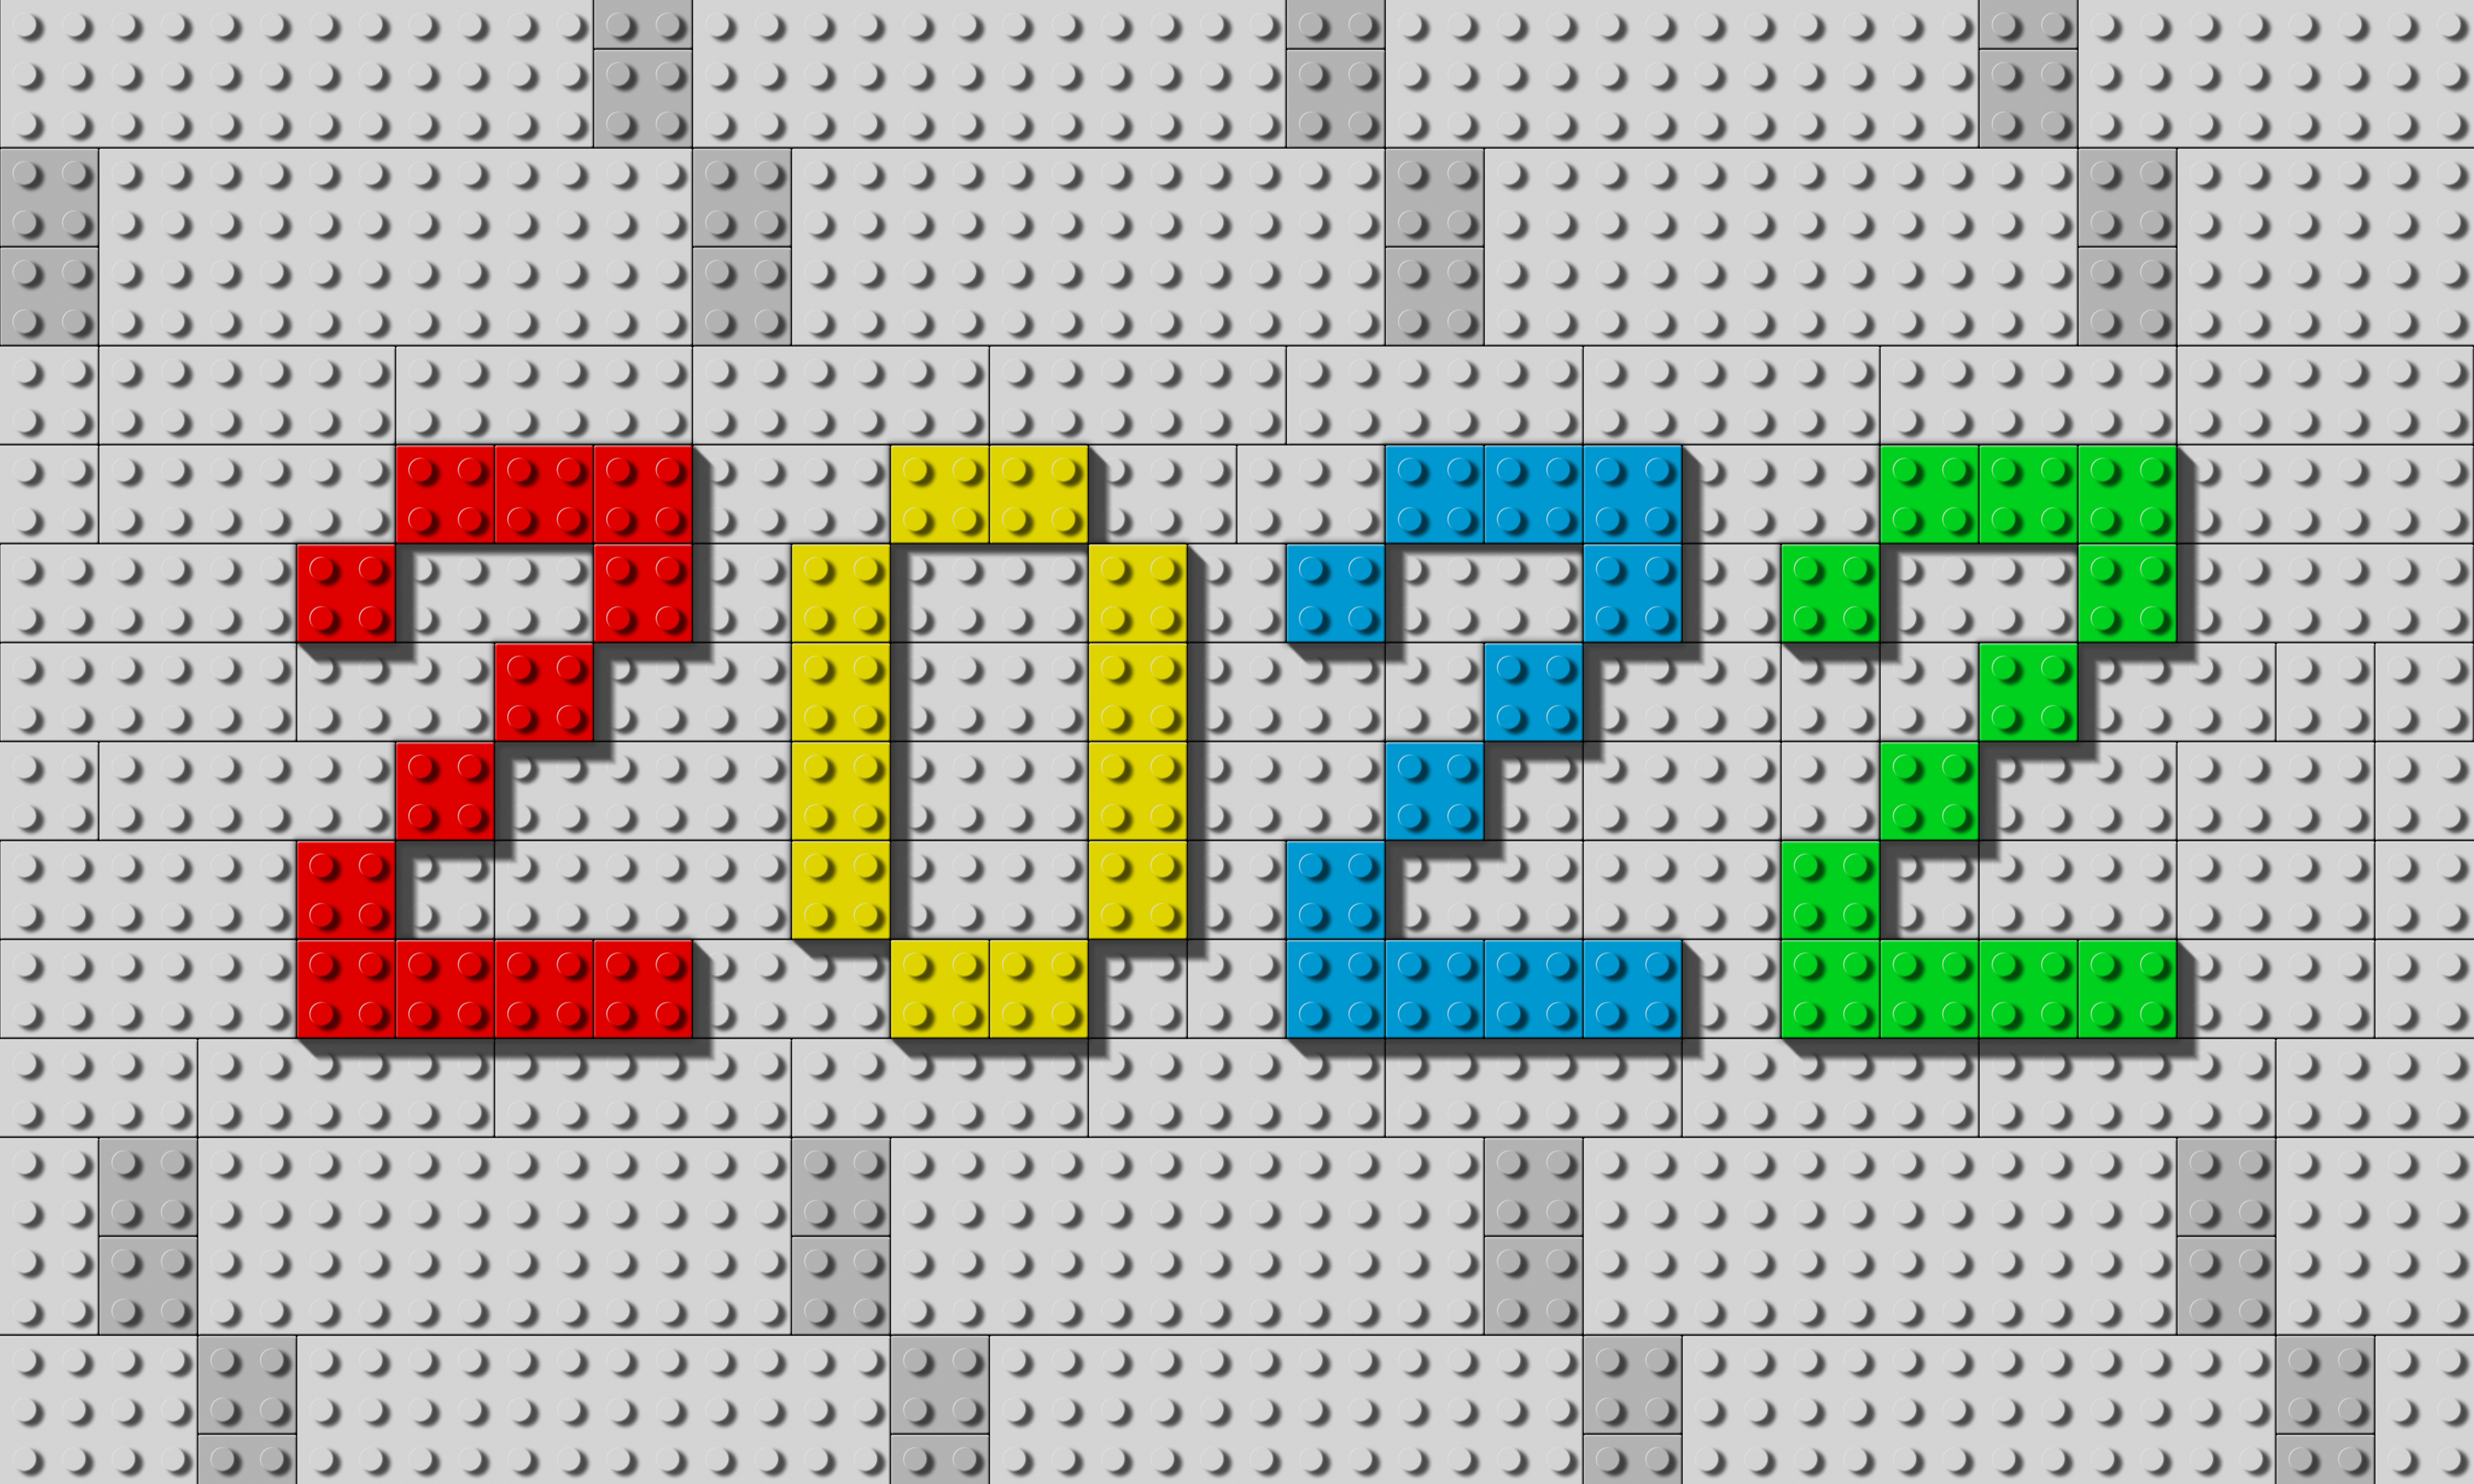 General 5000x3000 typography LEGO numbers colorful digital art